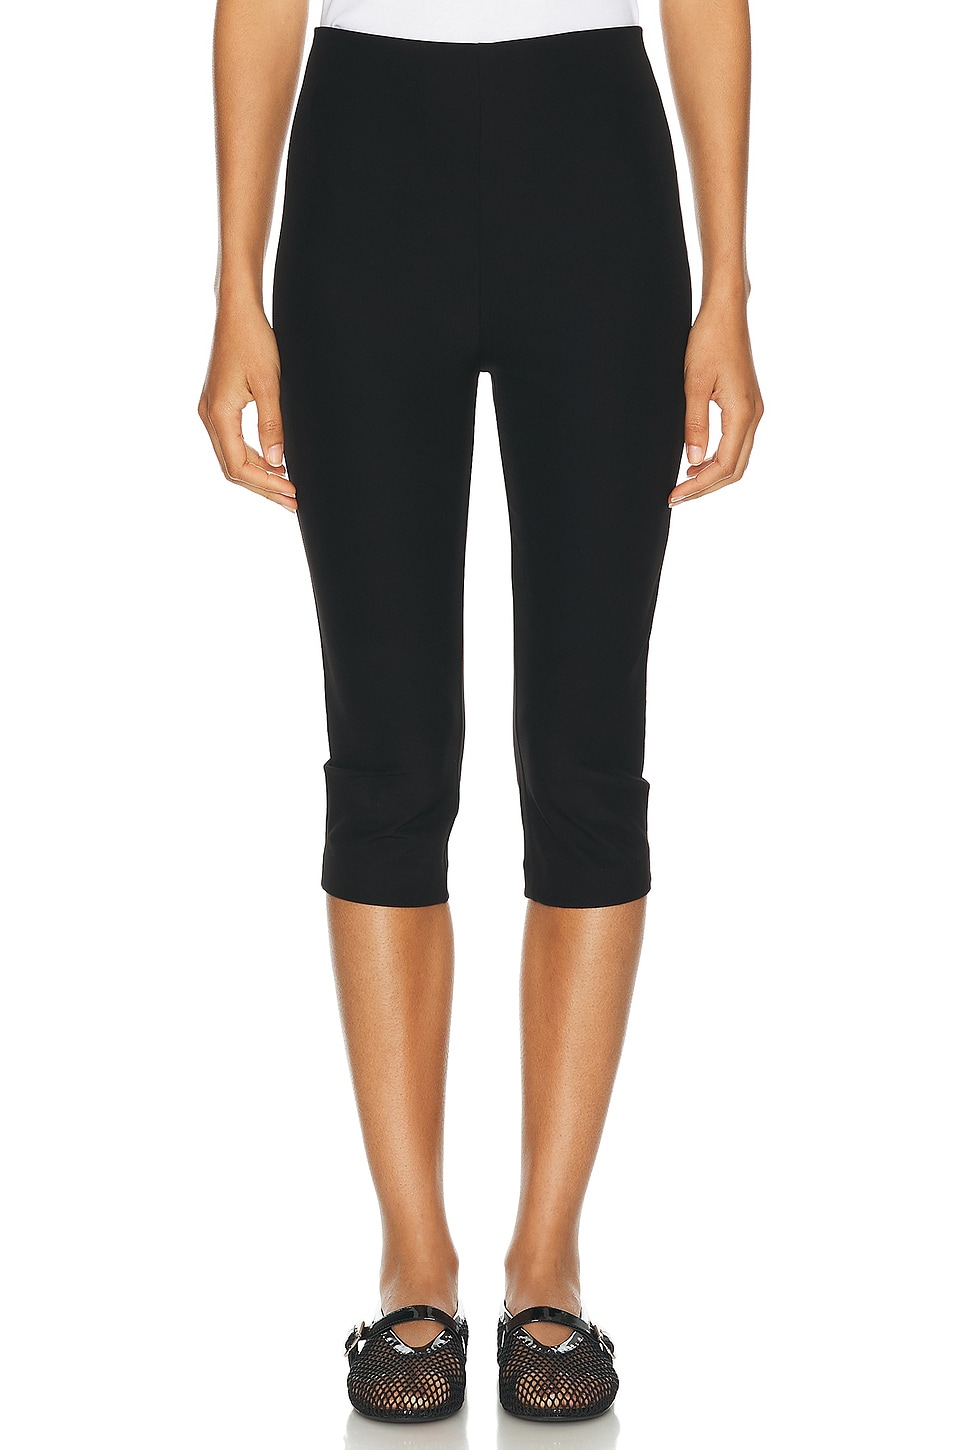 L'academie By Marianna Athina Capri Trouser In Black